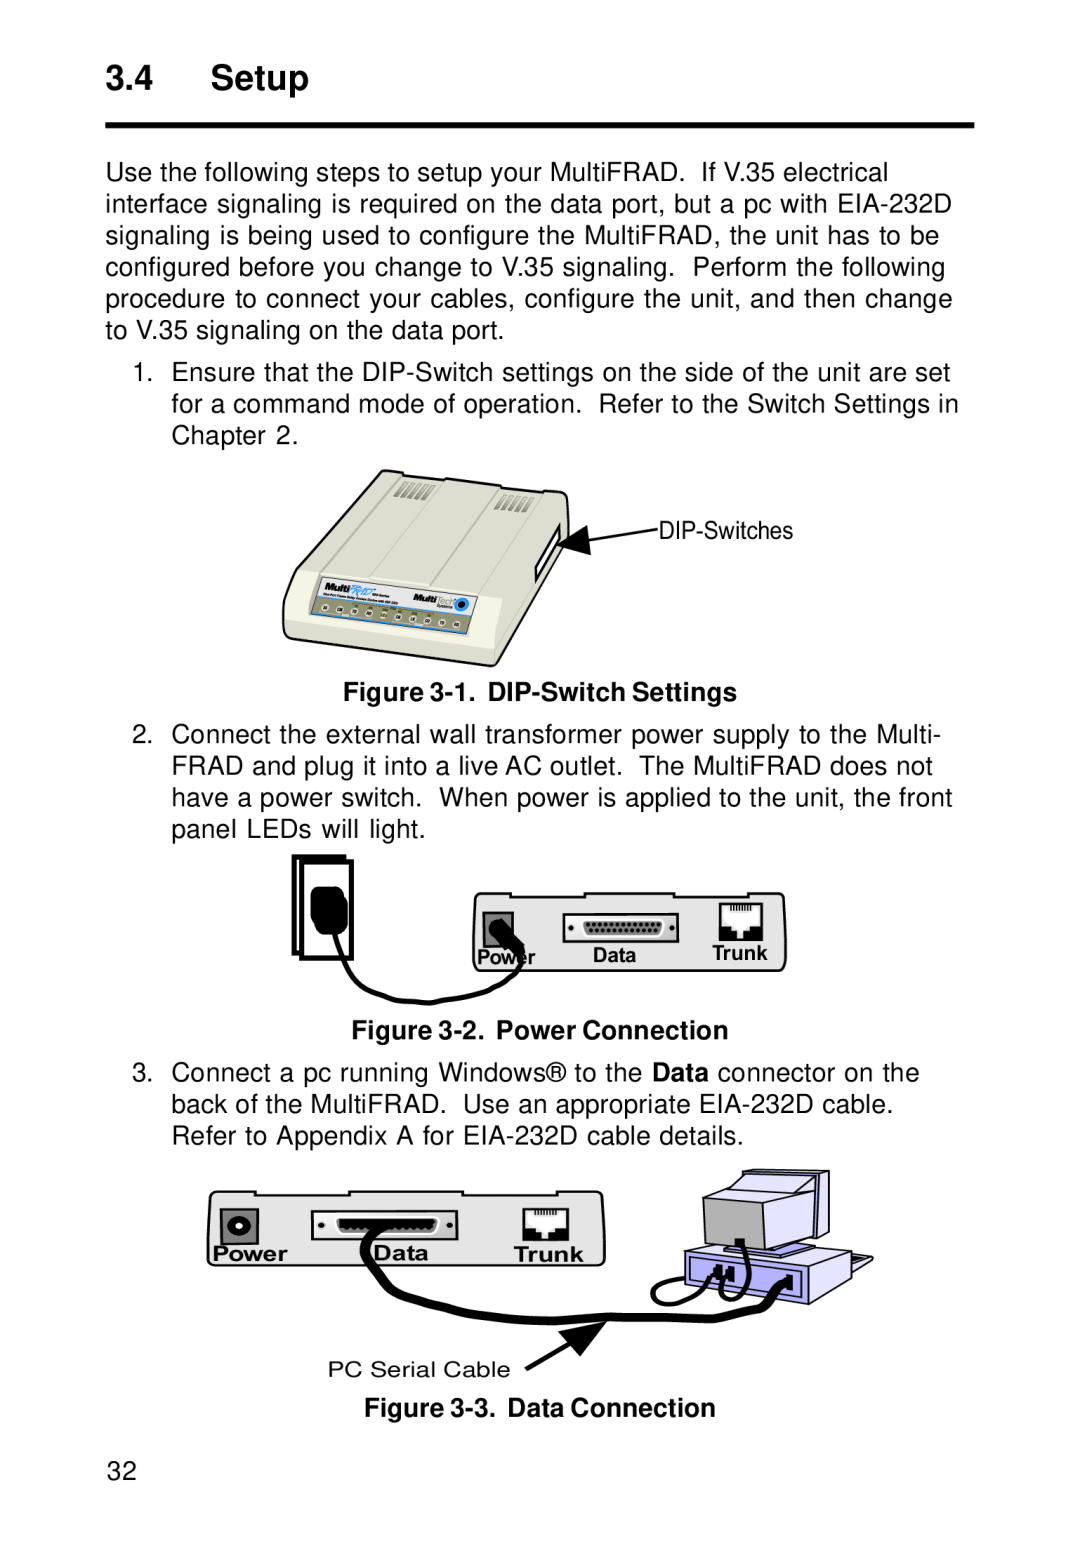 Multi-Tech Systems FR111 owner manual Setup, 1. DIP-Switch Settings, 2. Power Connection, 3. Data Connection 